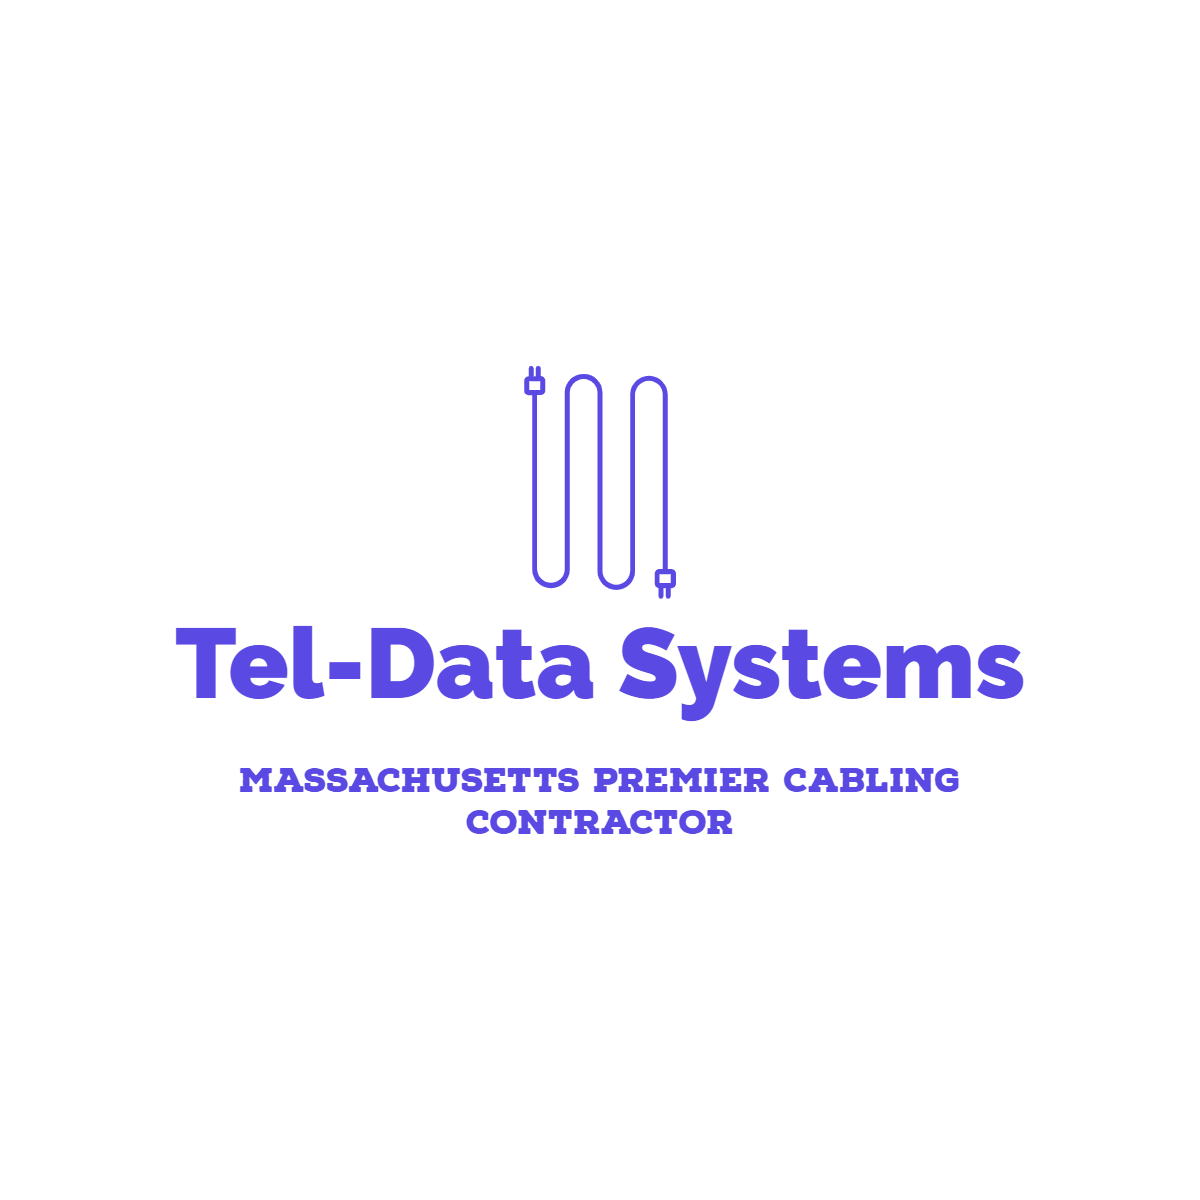 Tel-Data Systems - Massachusetts Premier Cabling Contractor